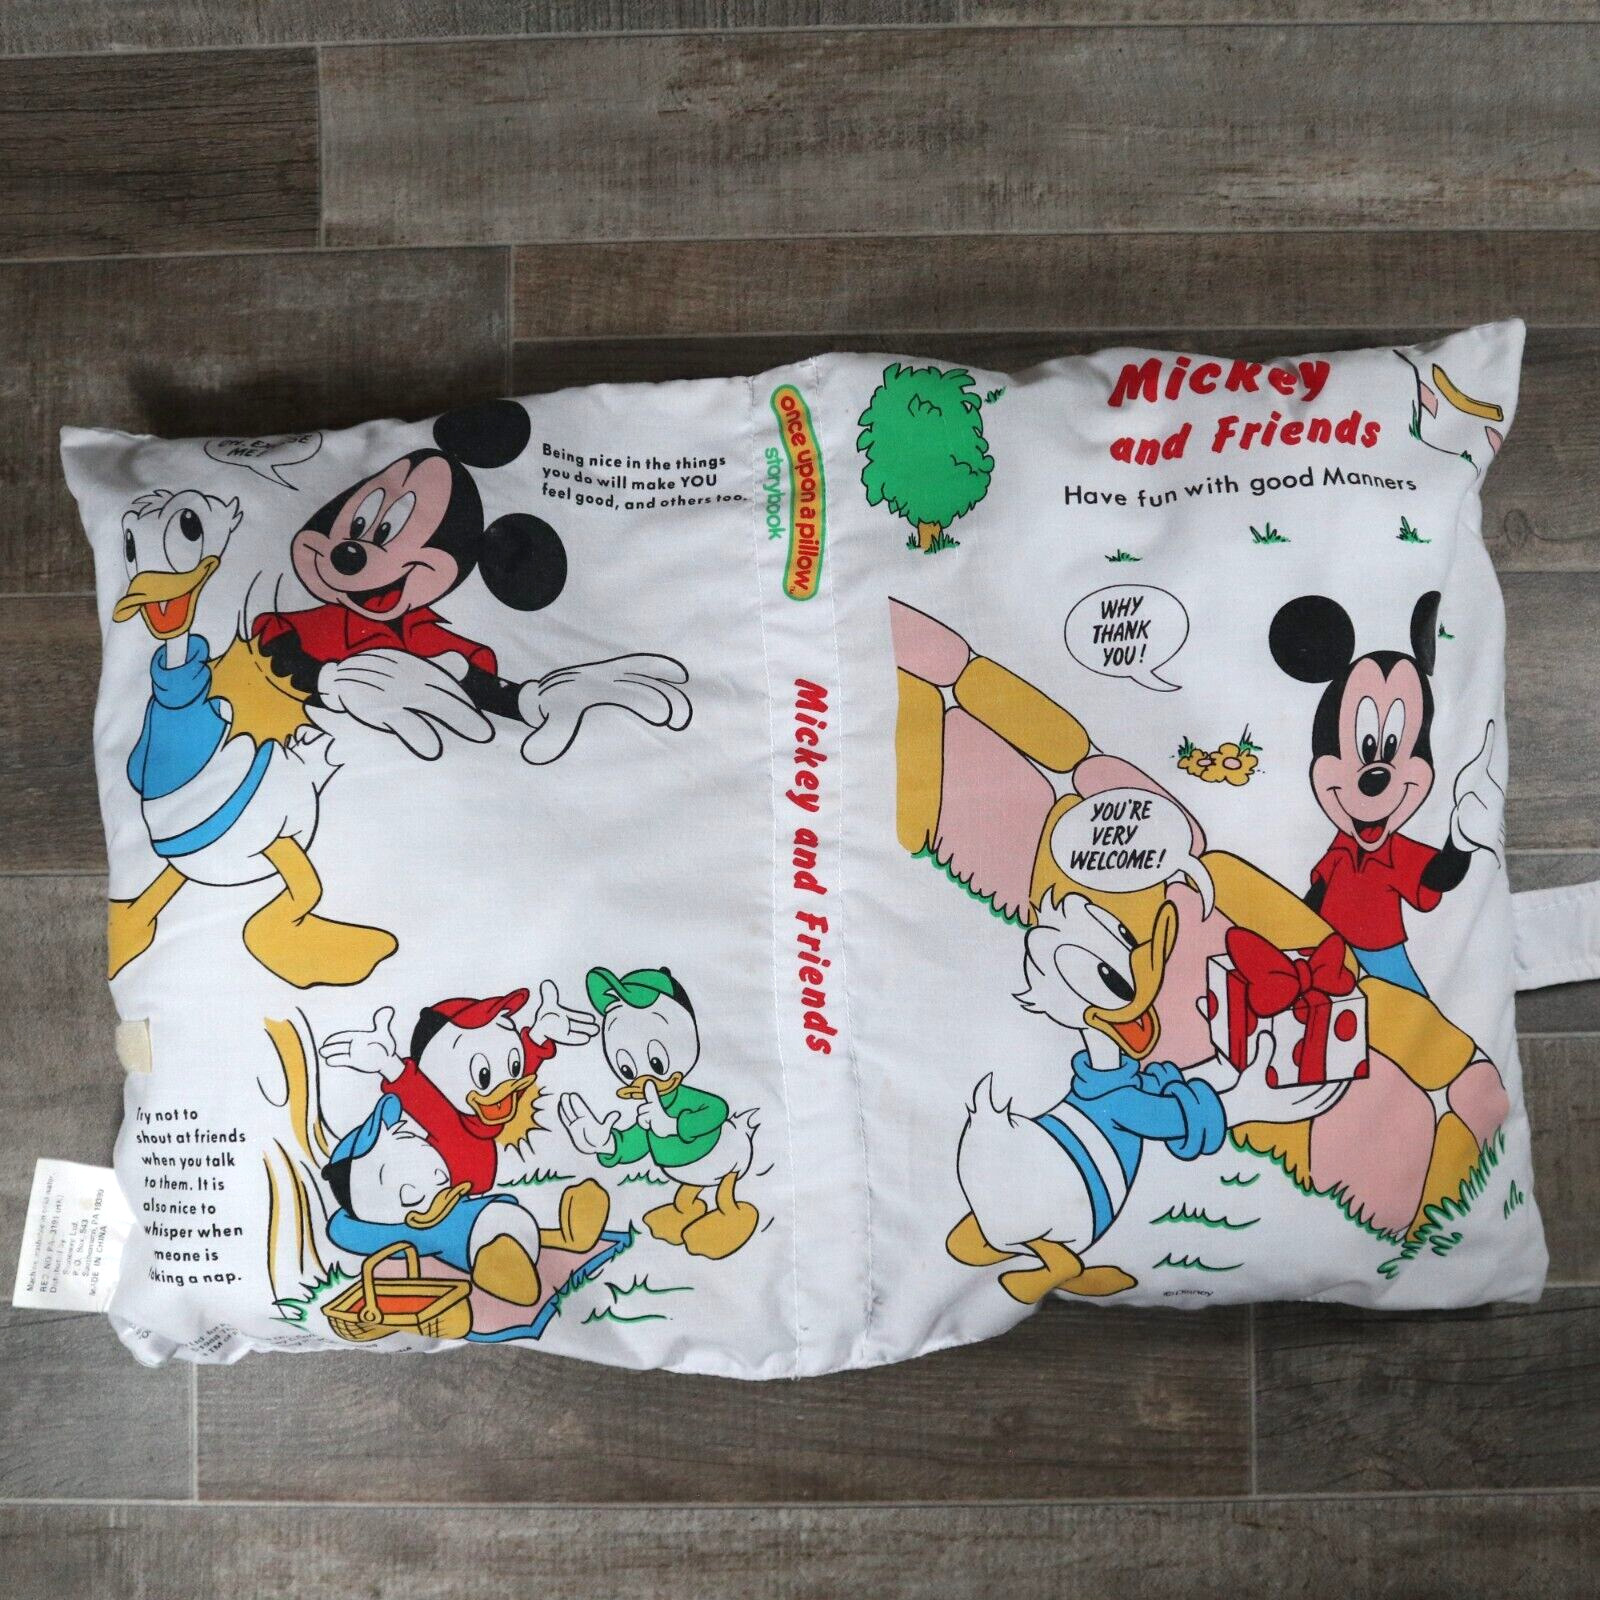 VTG 1989 Disney Mickey and Friends Once Upon A Pillow Have Fun with Good Manners